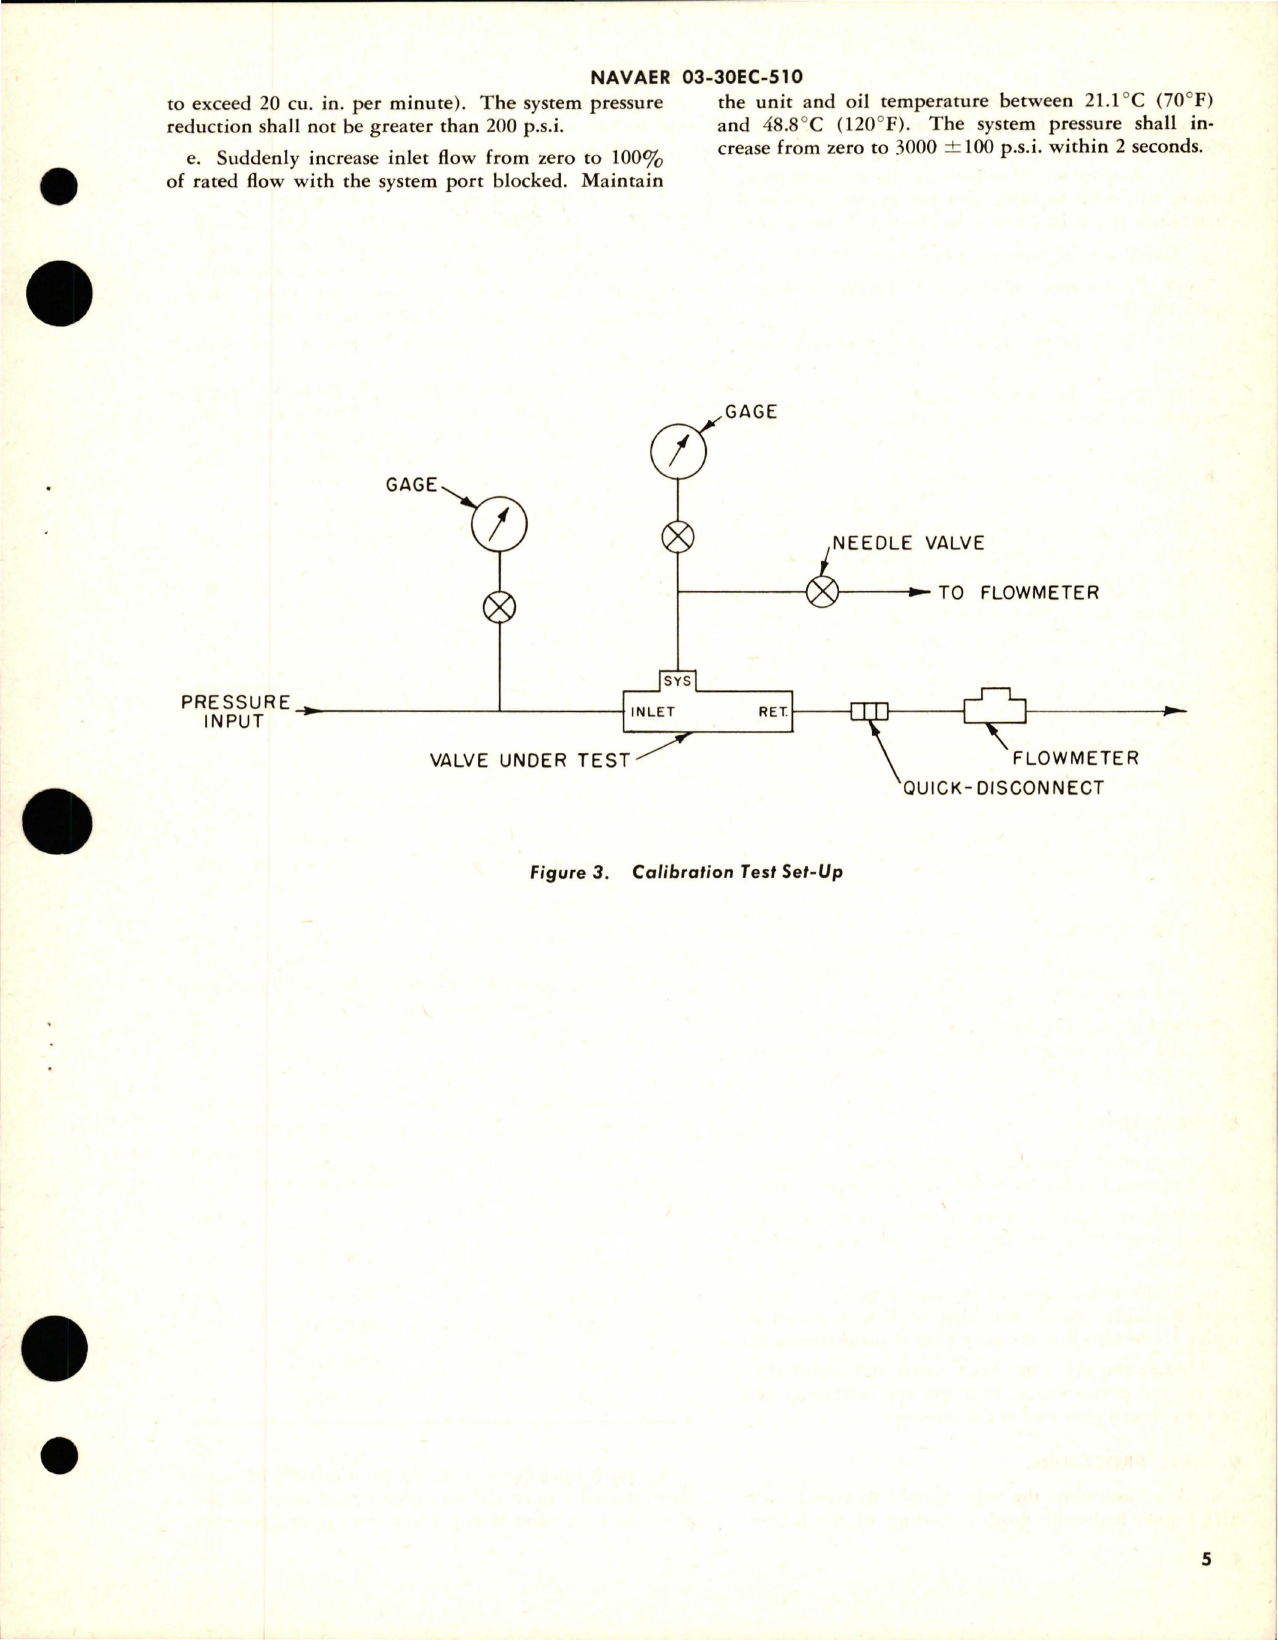 Sample page 5 from AirCorps Library document: Overhaul Instructions with Parts Breakdown for Hydraulic Flow Sensitive Pressure Regulator Valve - AFS-6-07